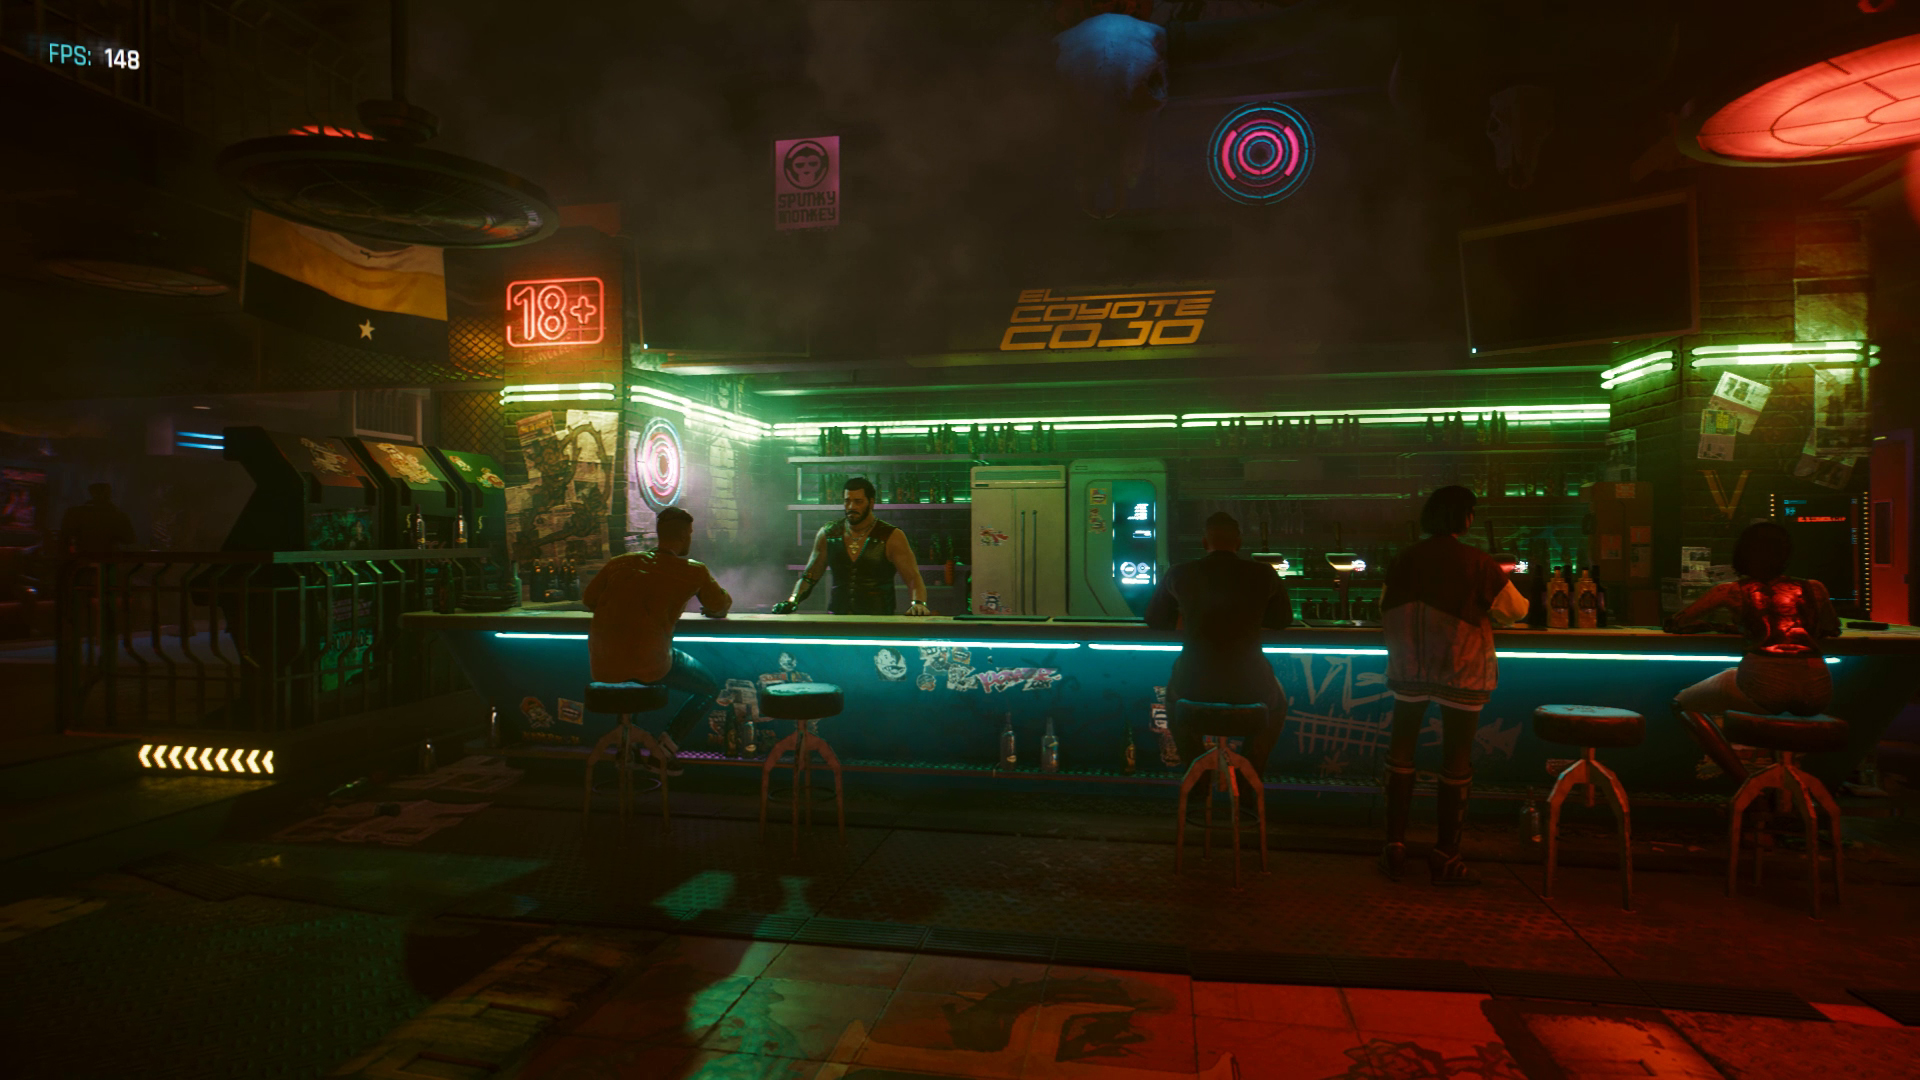 Cyberpunk 2077 Ray Tracing Overdrive Mode detailed in new Digital